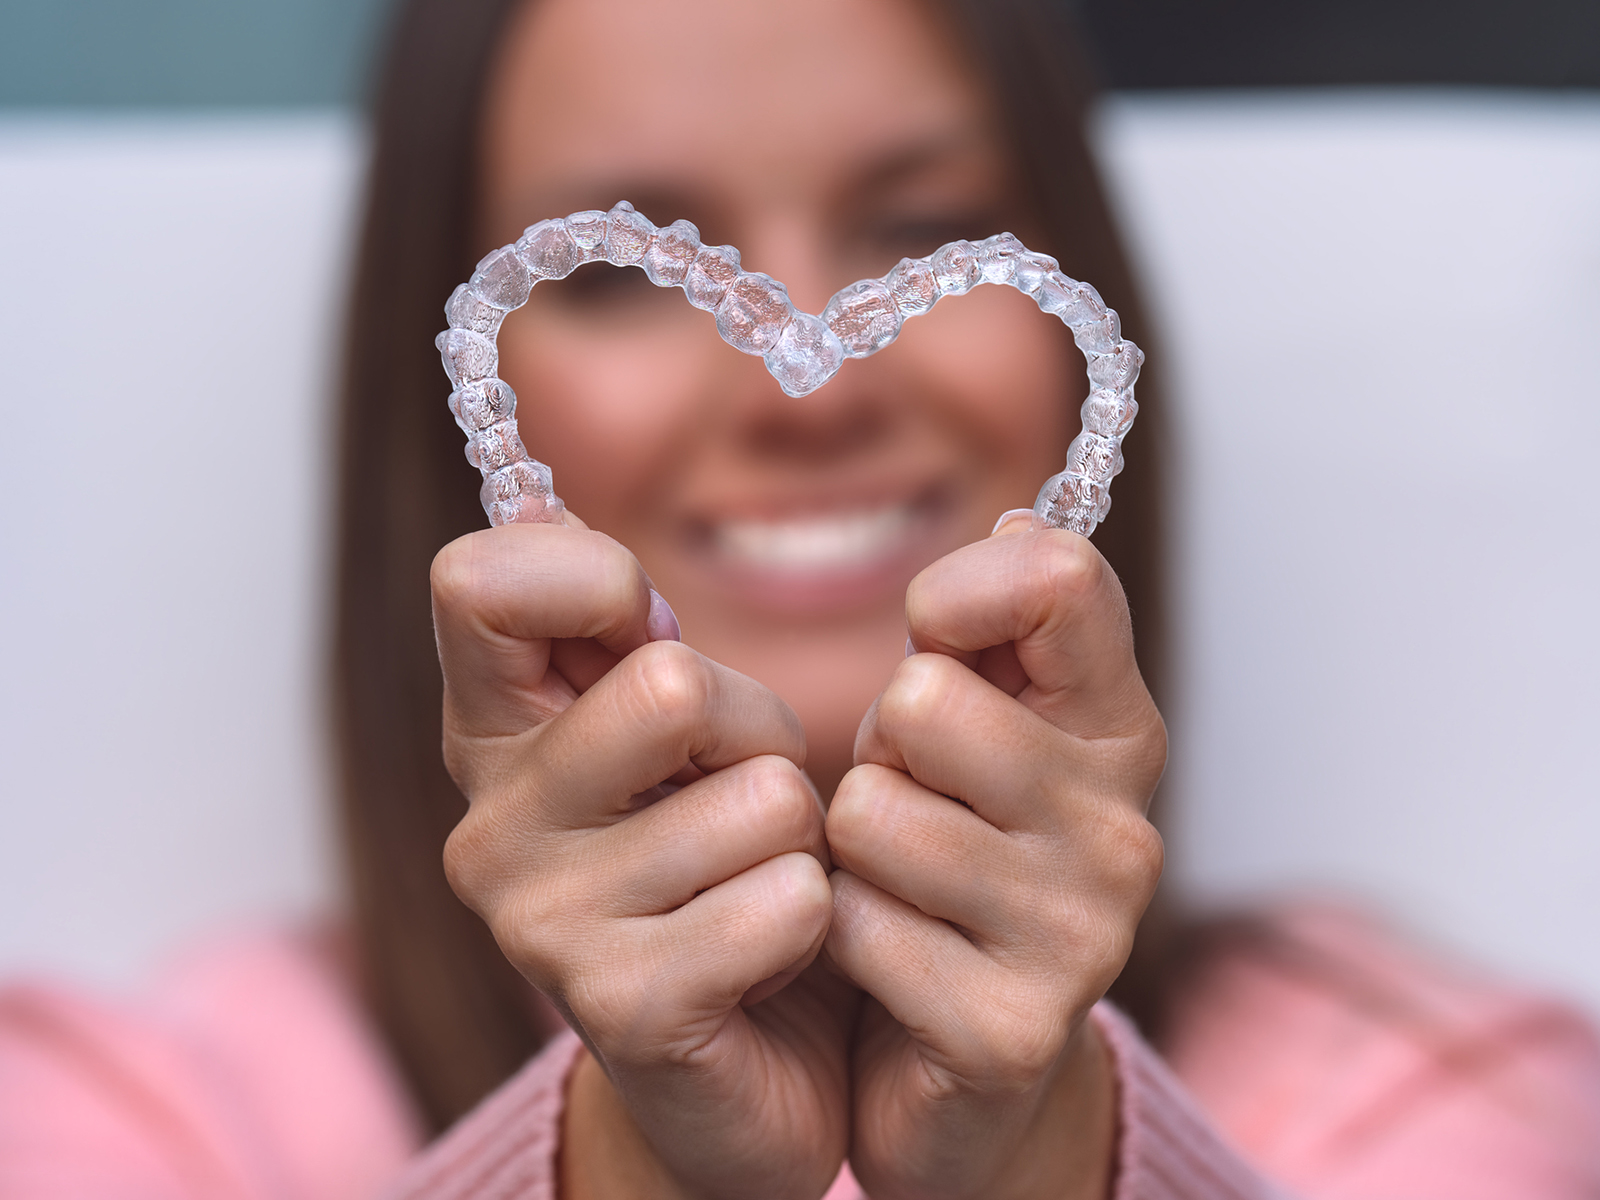 What are the disadvantages of Invisalign?